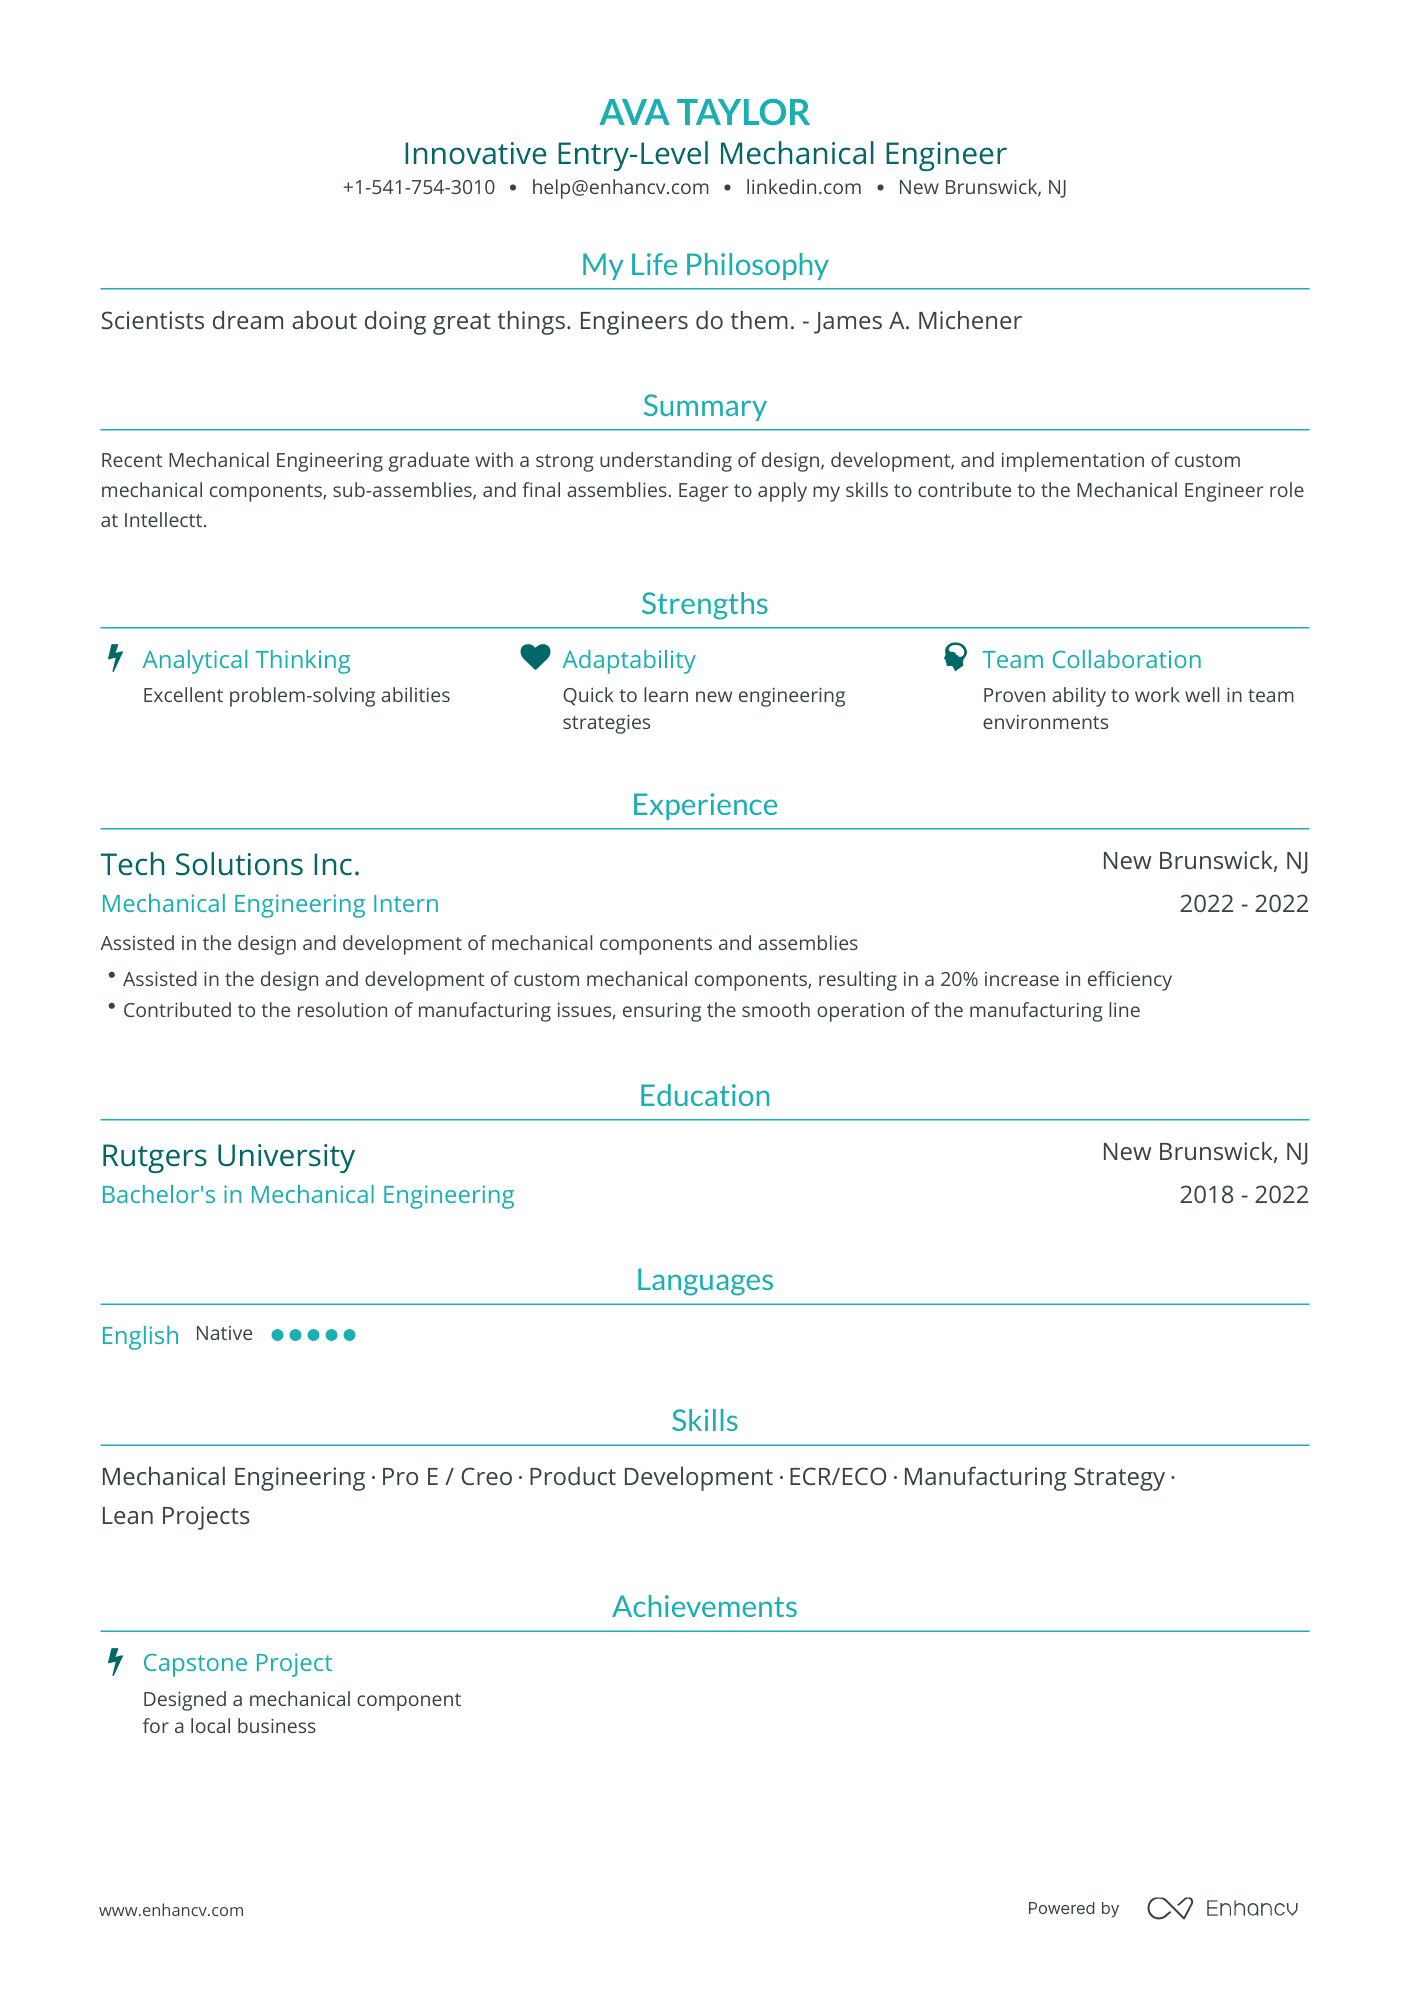 Traditional Entry Level Mechanical Engineer Resume Template